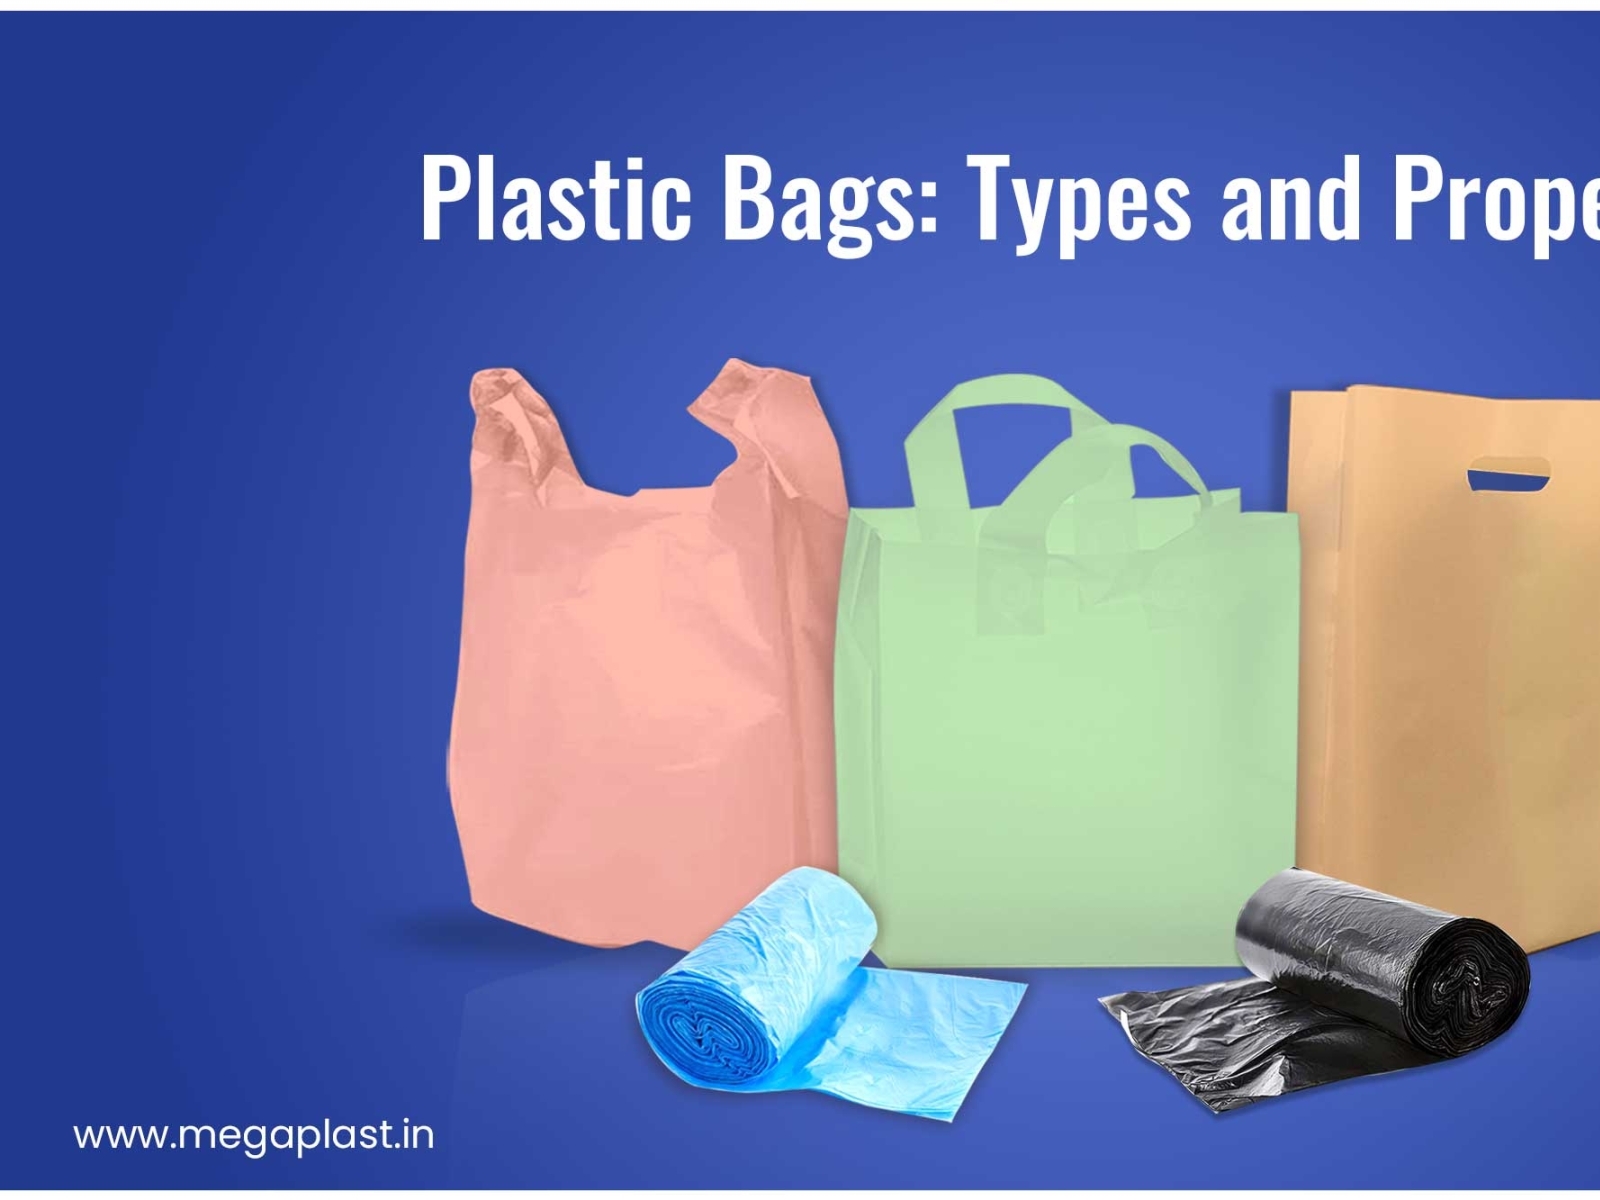 PLASTIC BAGS: TYPES AND PROPERTIES by MegaPlast on Dribbble